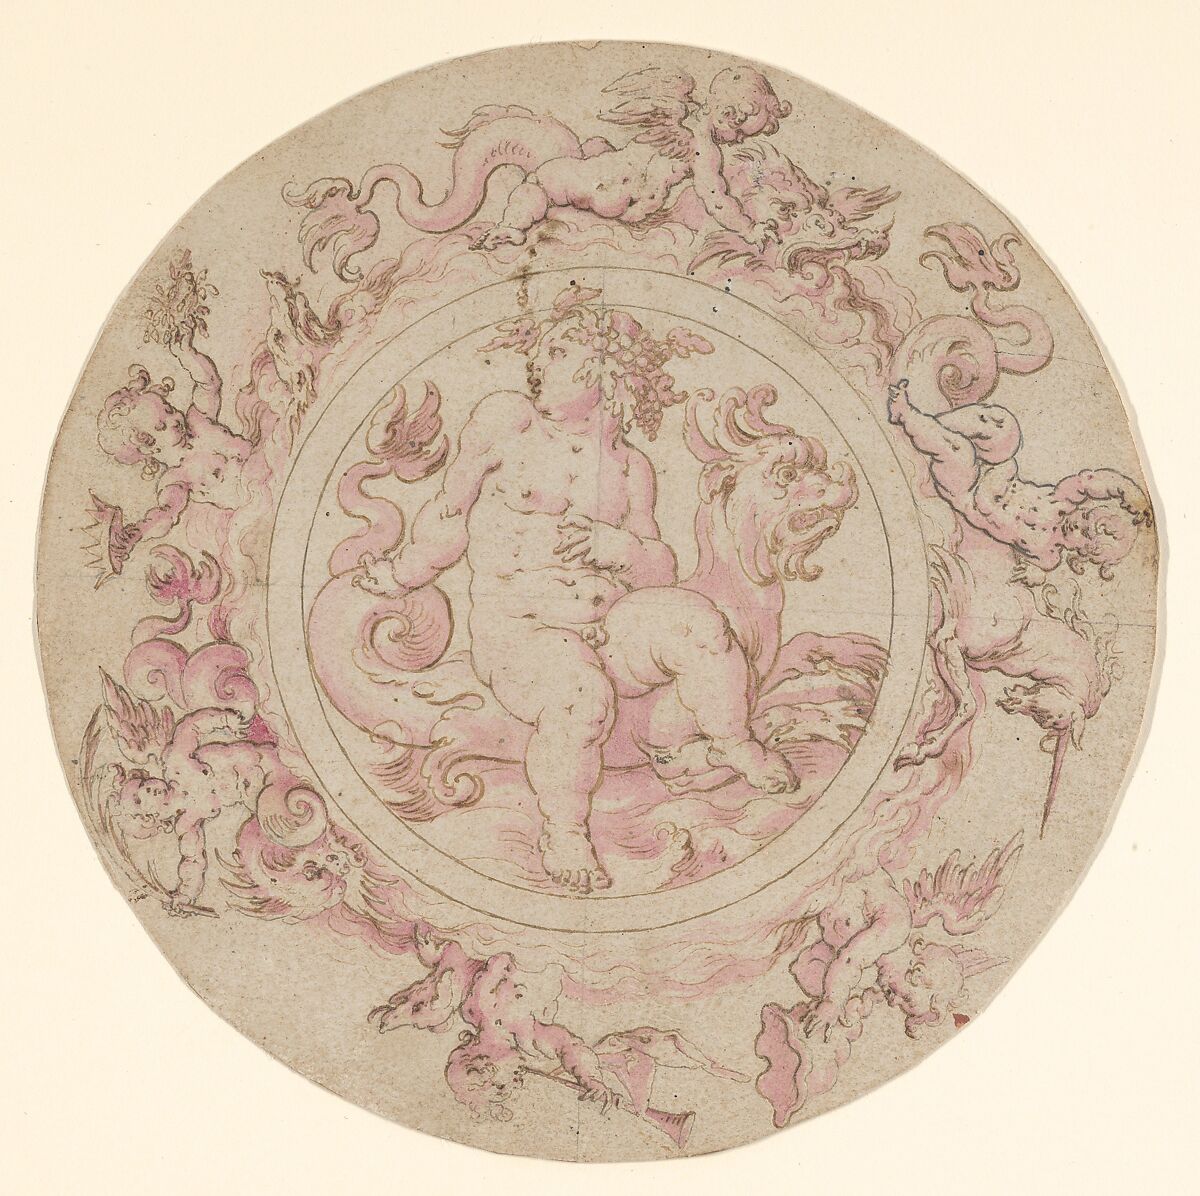 Design for a Tazza, Bowl or Dish, Anonymous, German  , active late 16th - early 17th century, Pen and brown ink, brush and red (fuchsia) wash, traced with a stylus 